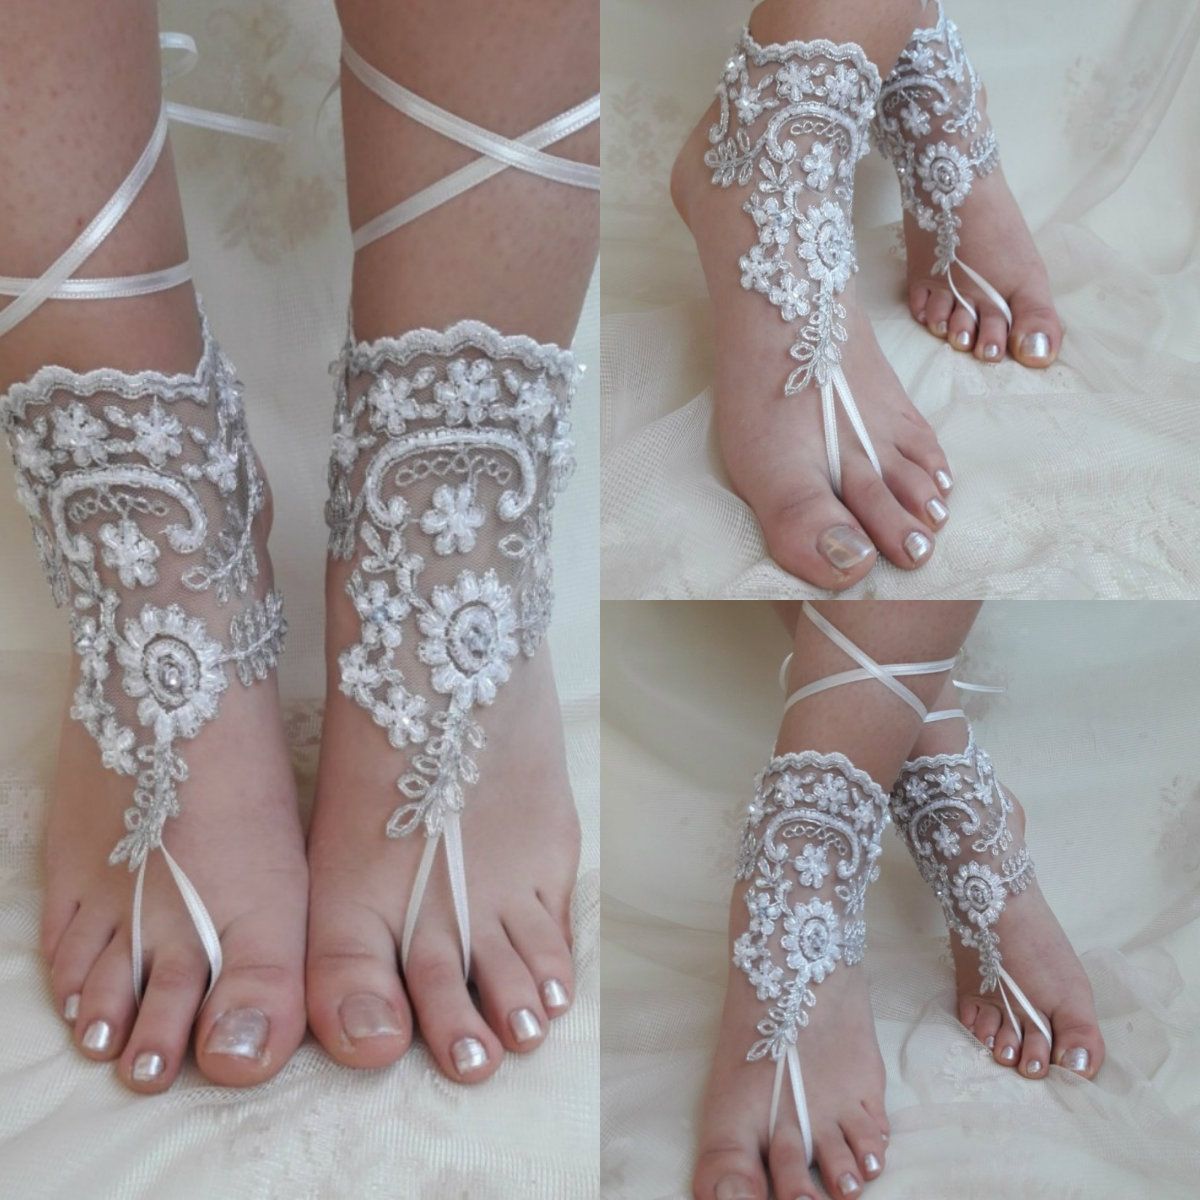 Sexy Ribbon Beach Wedding Shoes Lace Delicate Beaded Open Toe Ankle Strap Flat Bridal Shoe For Summer Canada 2019 From Huifangzou Cad 29 21 Dhgate